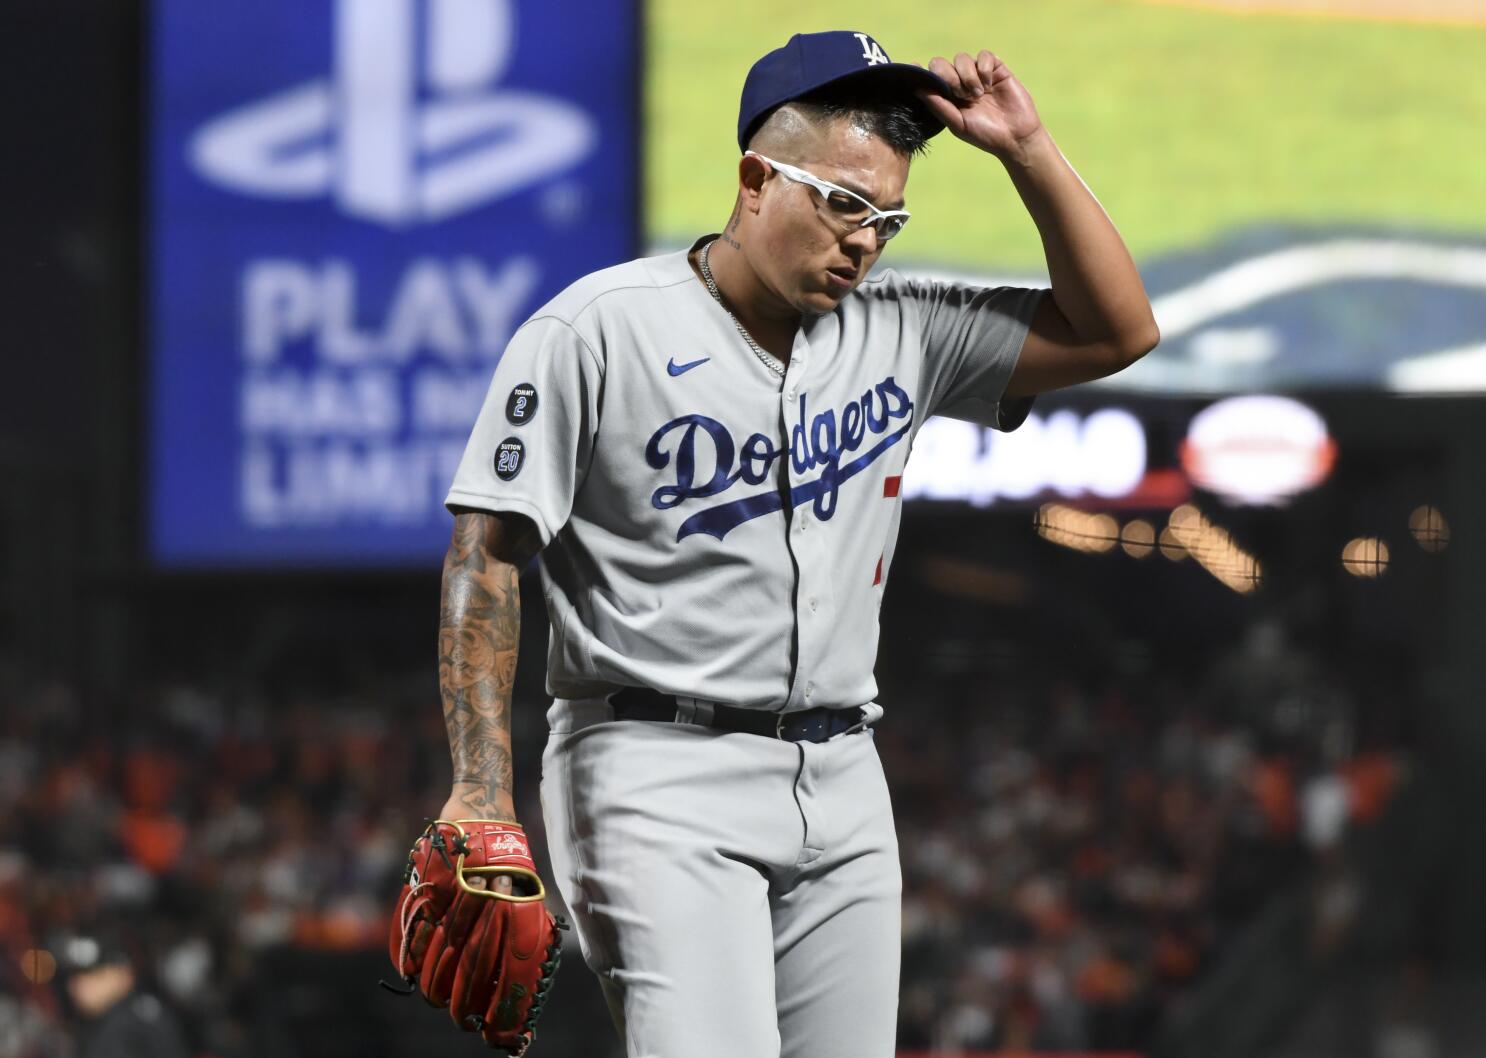 Julio Urias Describes Getting Final Out in World Series, Winning